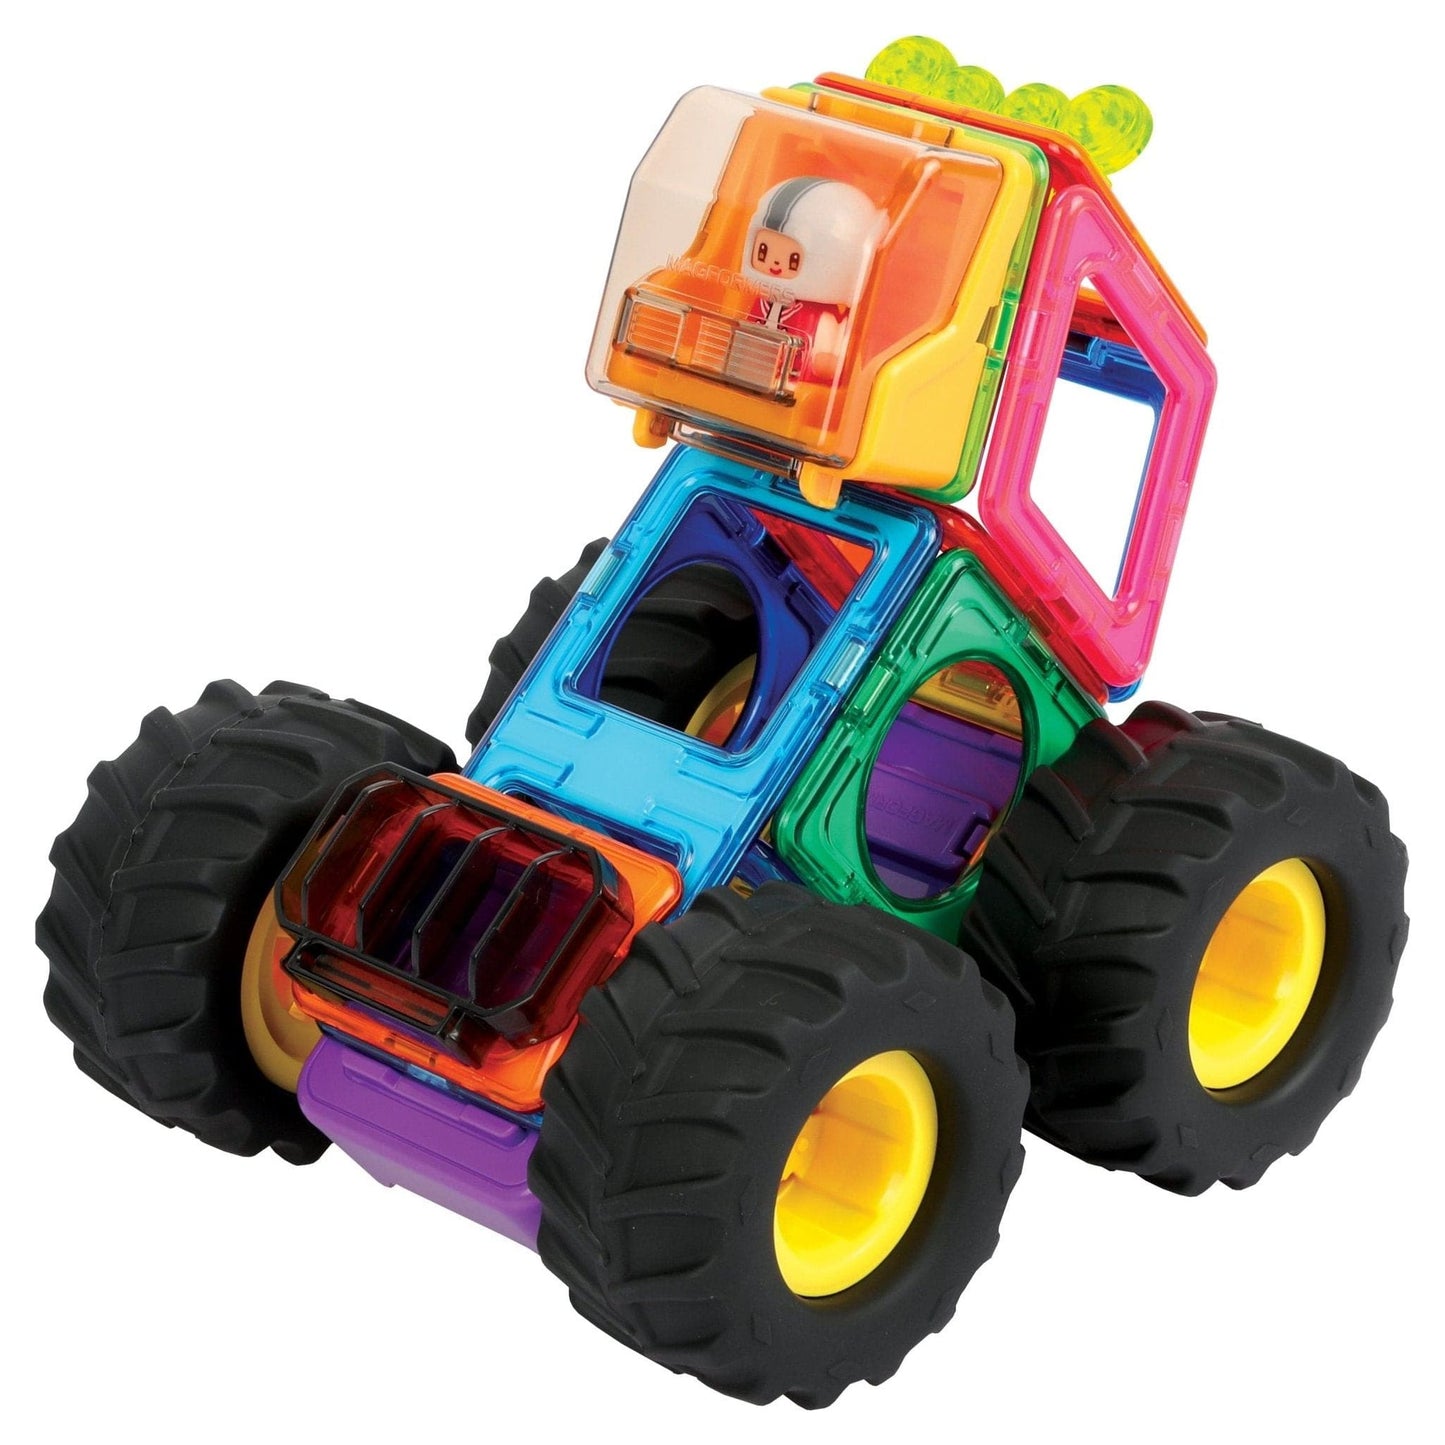 car shape made from Magformers Construction Toy Giant Wheel Set